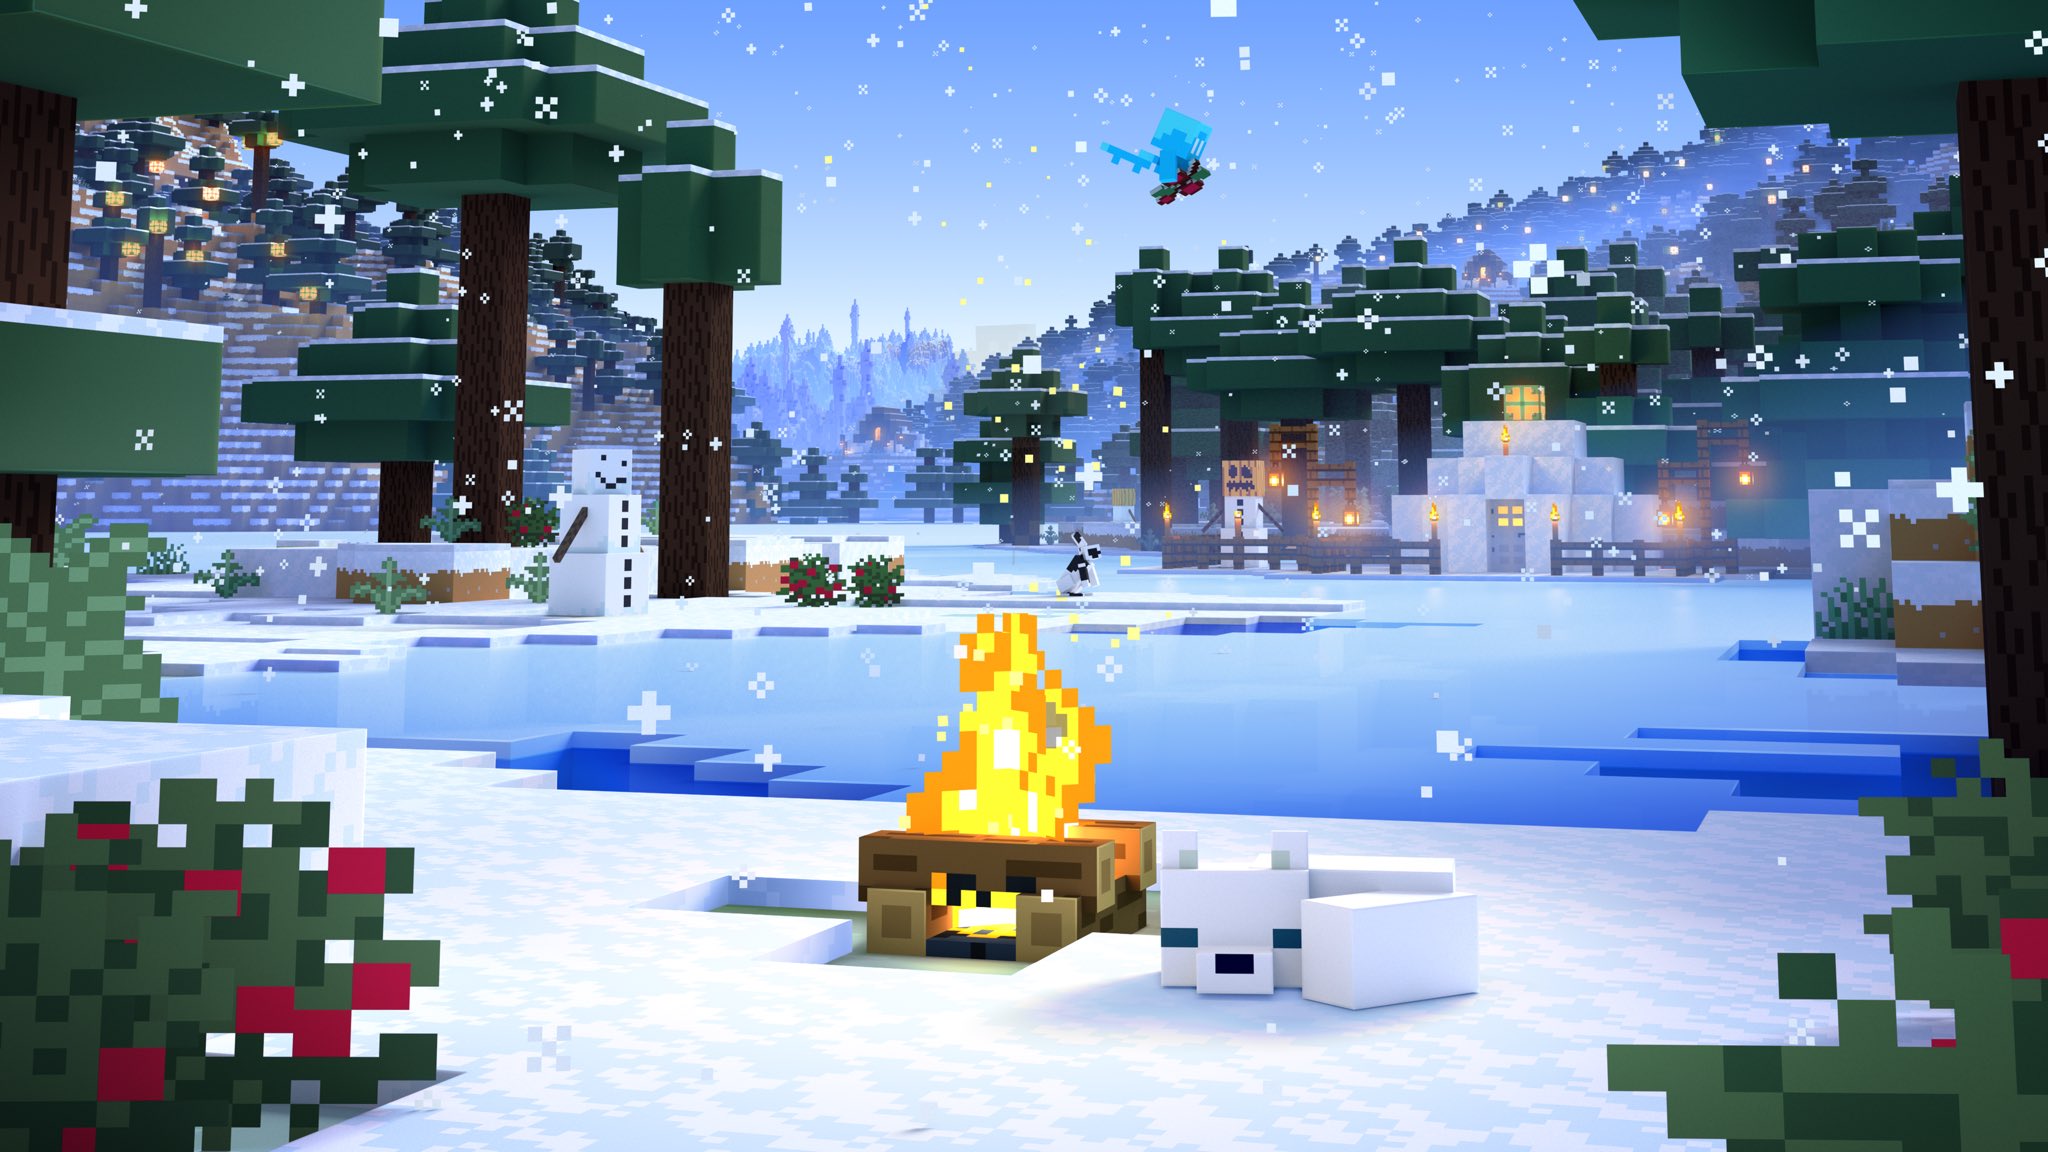 Minecraft Wiki EN on X: Merry Christmas to all who celebrate from